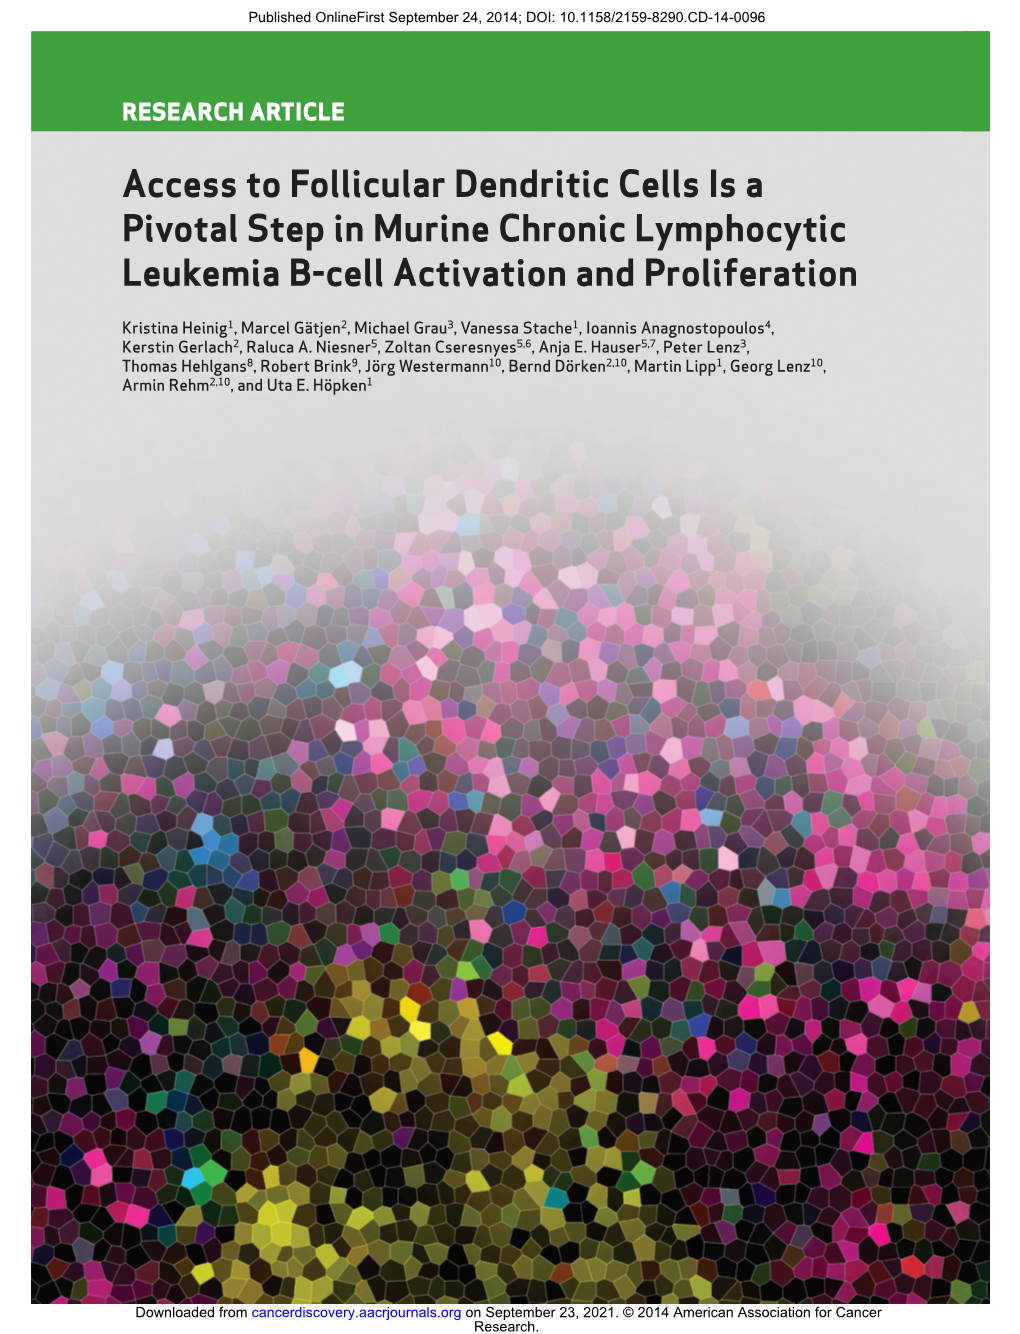 Access to Follicular Dendritic Cells Is a Pivotal Step in Murine Chronic Lymphocytic Leukemia B-Cell Activation and Proliferation